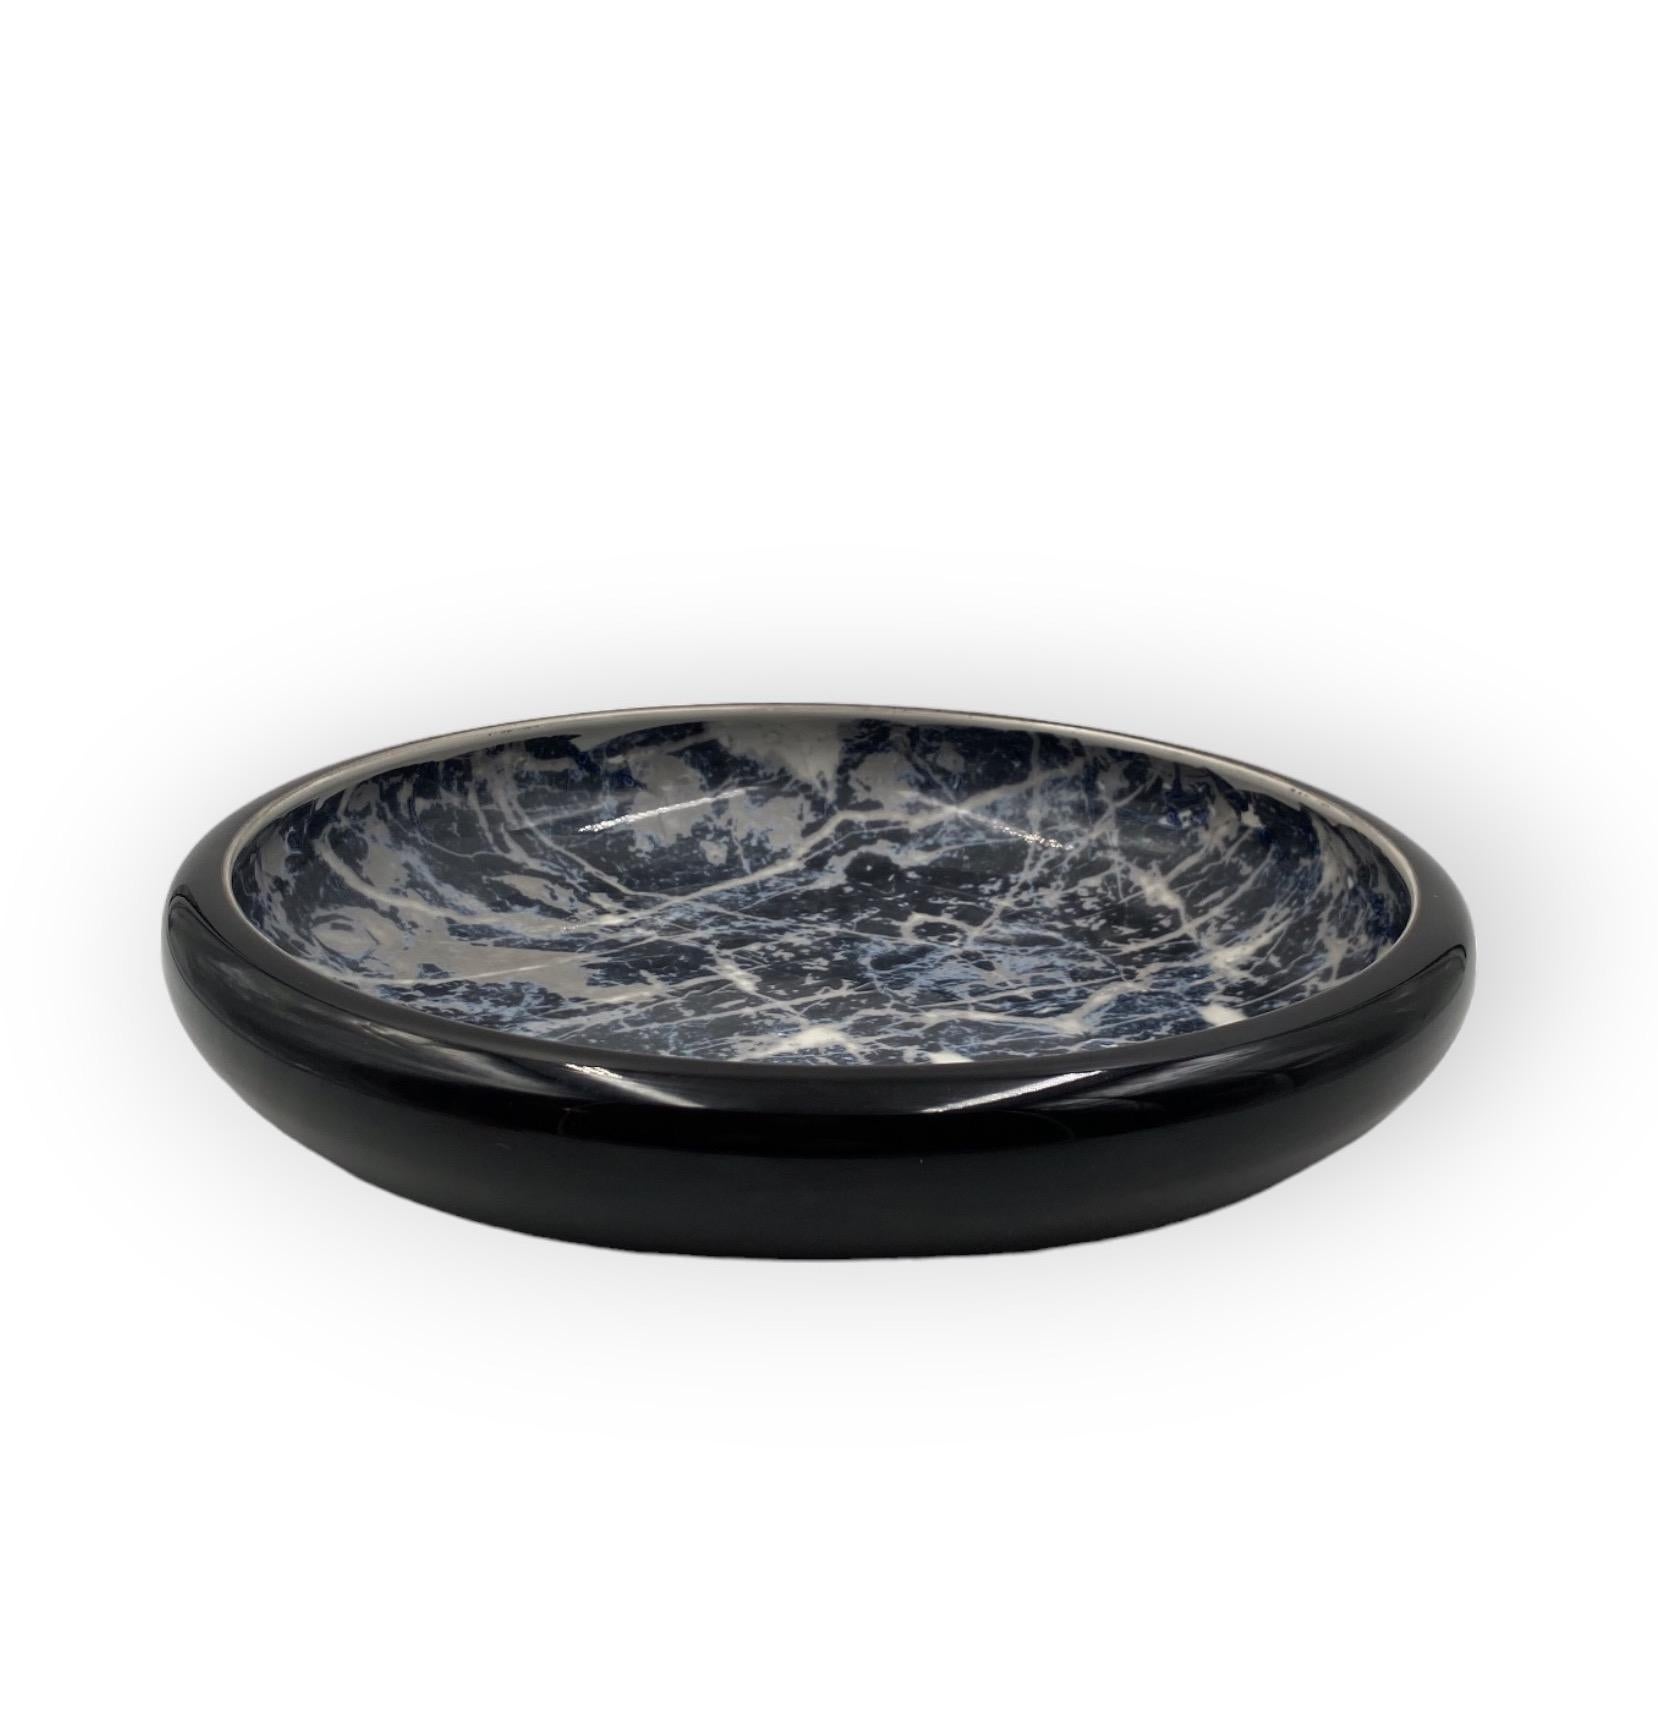 Black marbled ceramic centerpiece / vide poche manufactured by Alvino Bagni

Italy ca. 1970 

H 8 cm x 37 cm diam.

Conditions: excellent consistent with age and use.